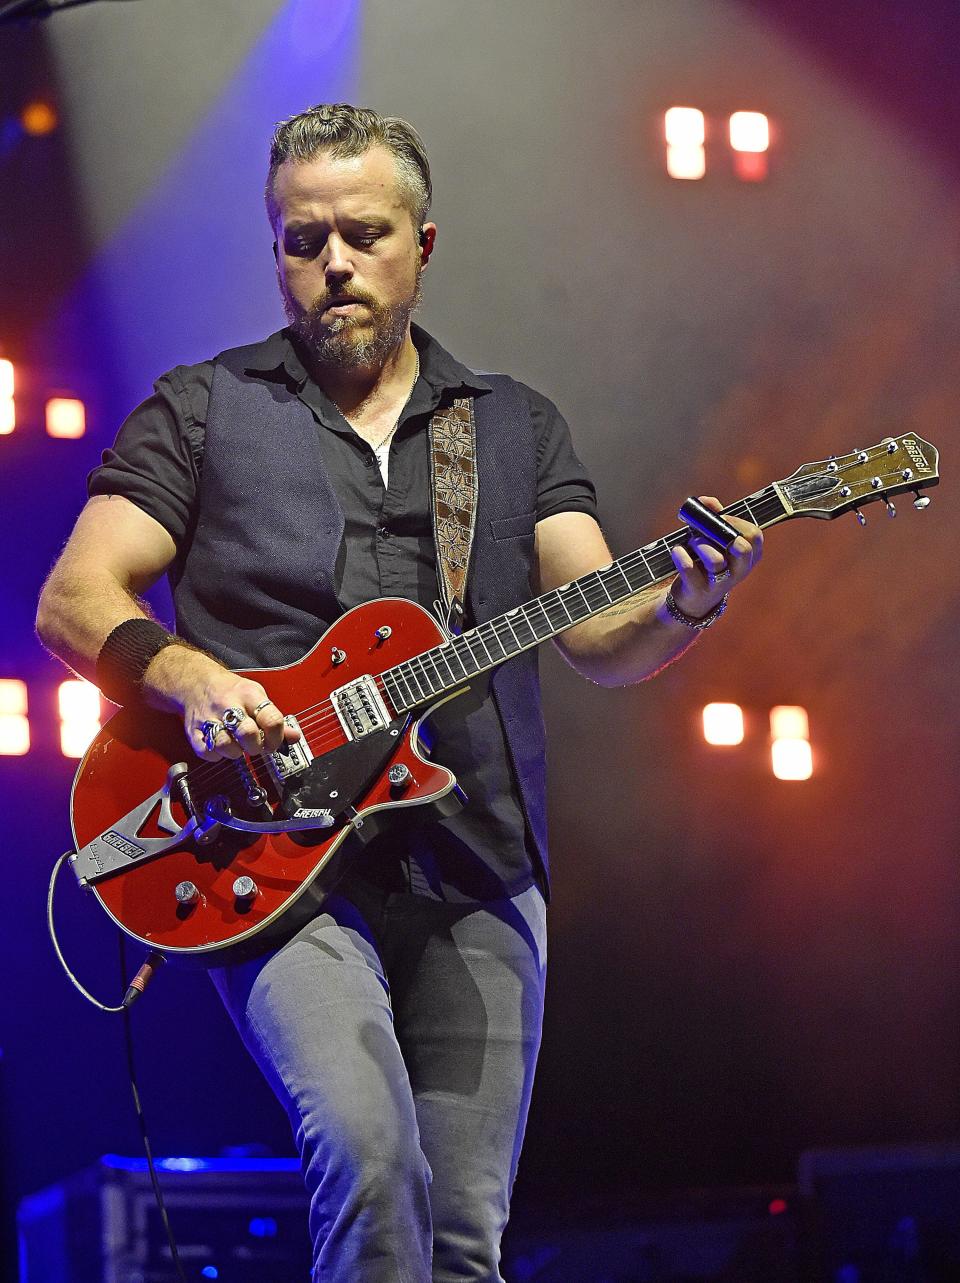 Jason Isbell and the 400 Unit performs during ShoalsFest at McFarland Park in Florence, Alabama October 5, 2019.